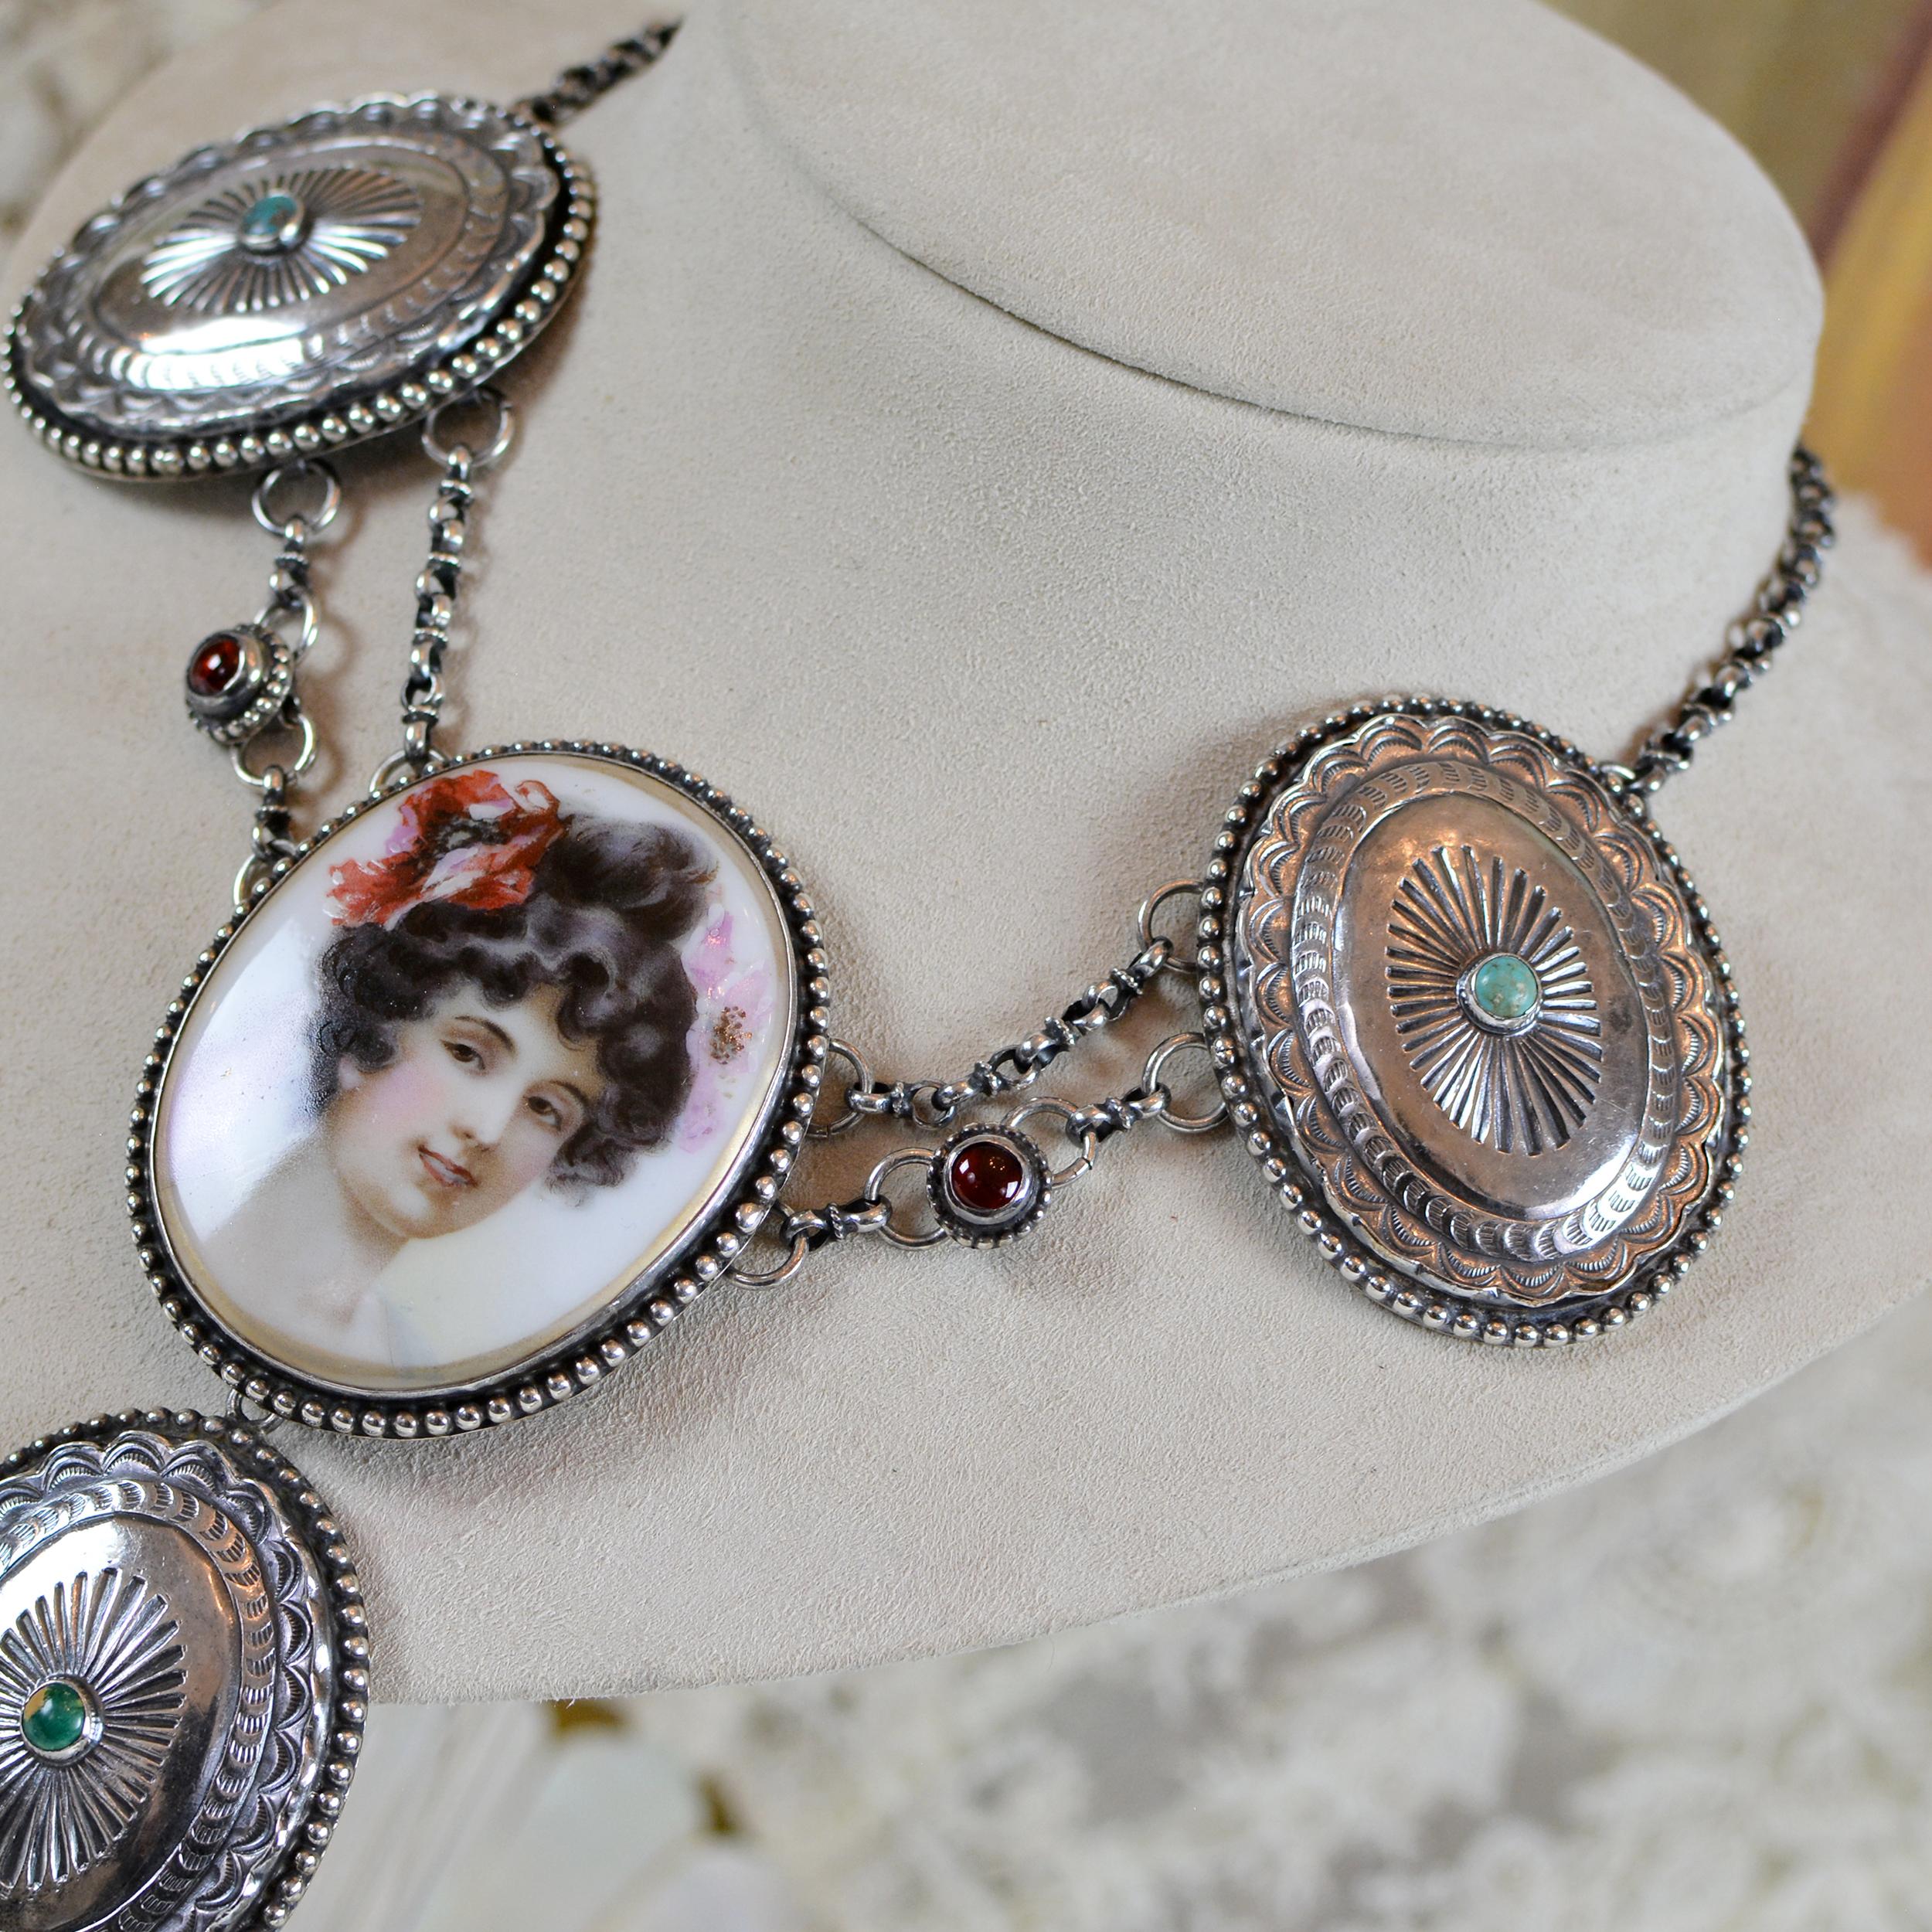 Jill Garber Goddess Portrait Festoon Necklace with Navajo Concho's and Garnets In Excellent Condition For Sale In Saginaw, MI